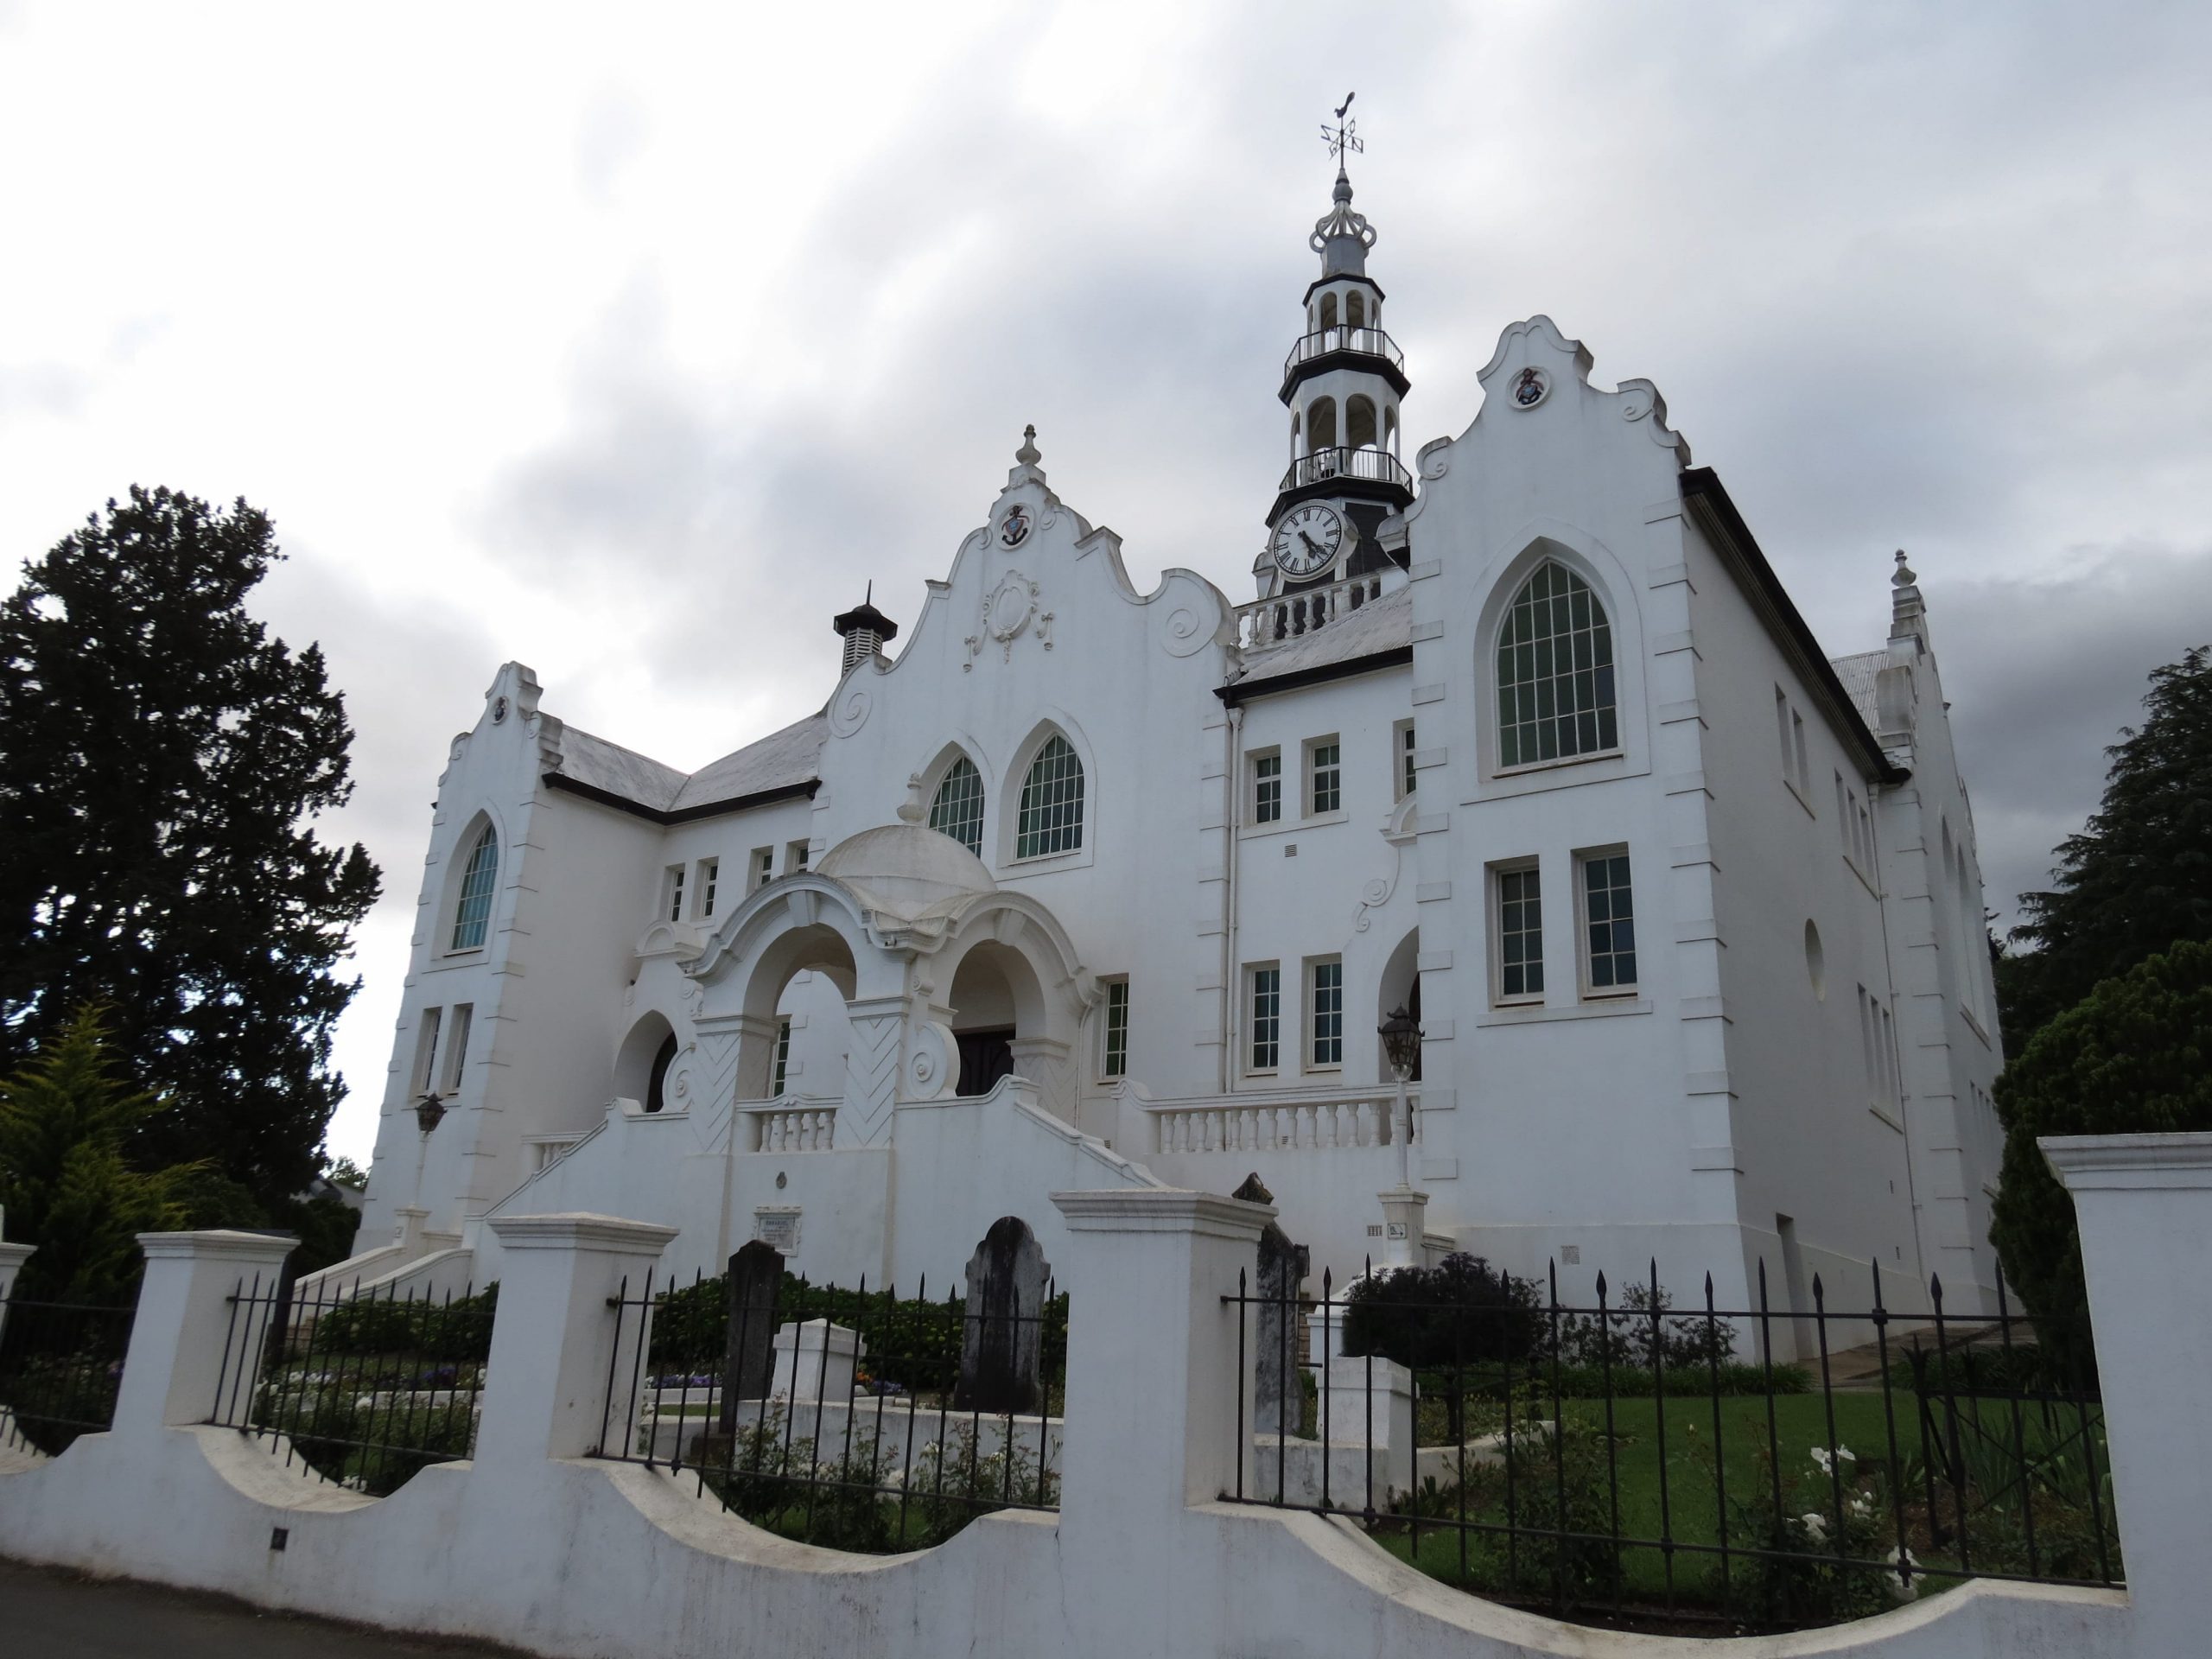 South Africa Driving Tour with Classic Travelling - Swellendam